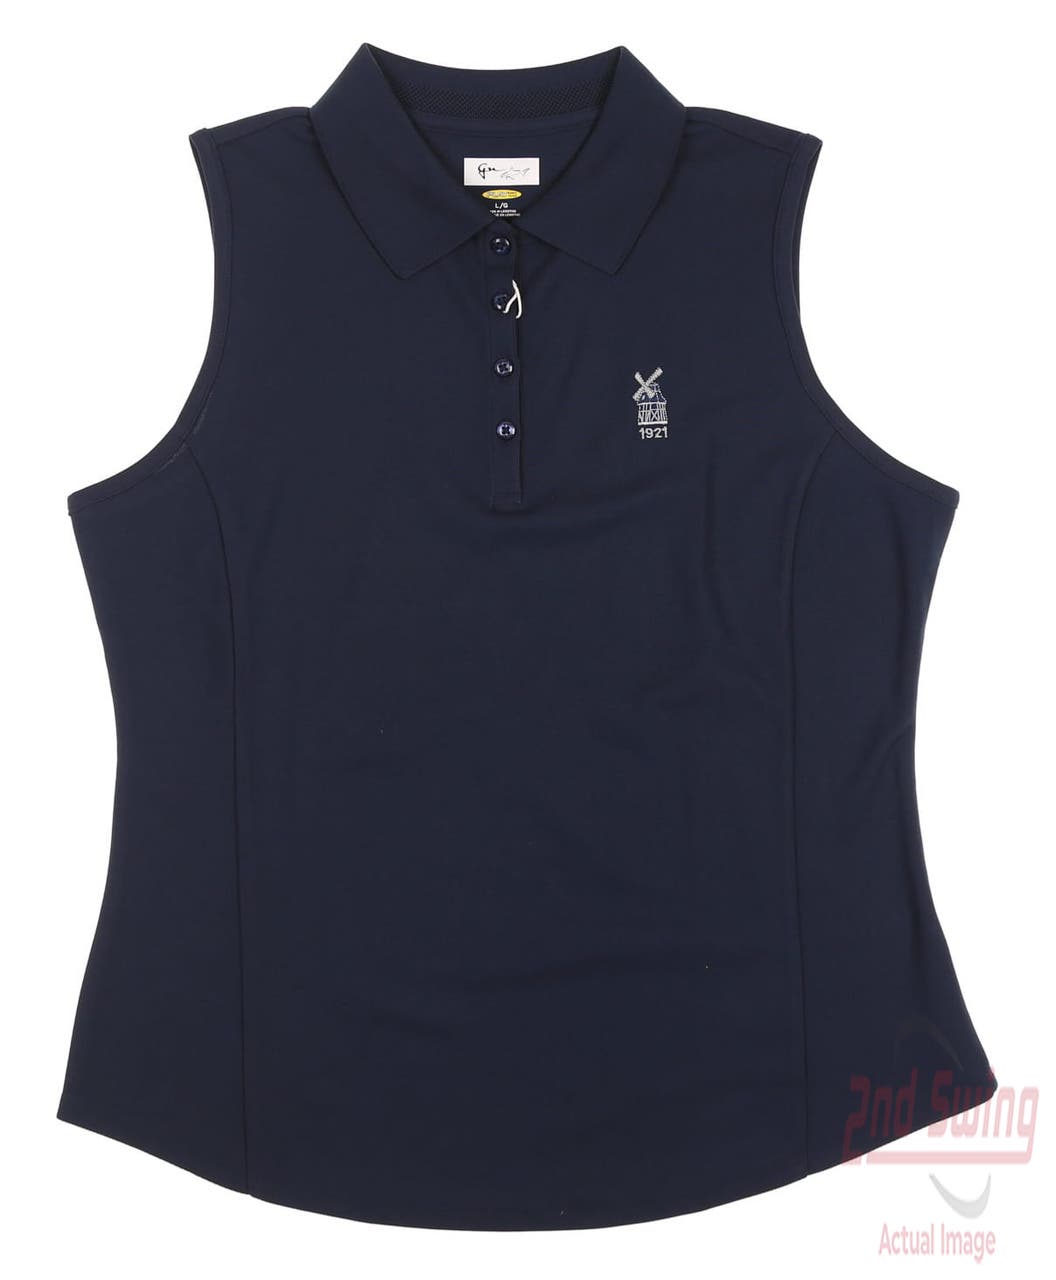 New W/ Logo Womens Greg Norman Sleeveless Golf Polo Large L Navy Blue MSRP $39